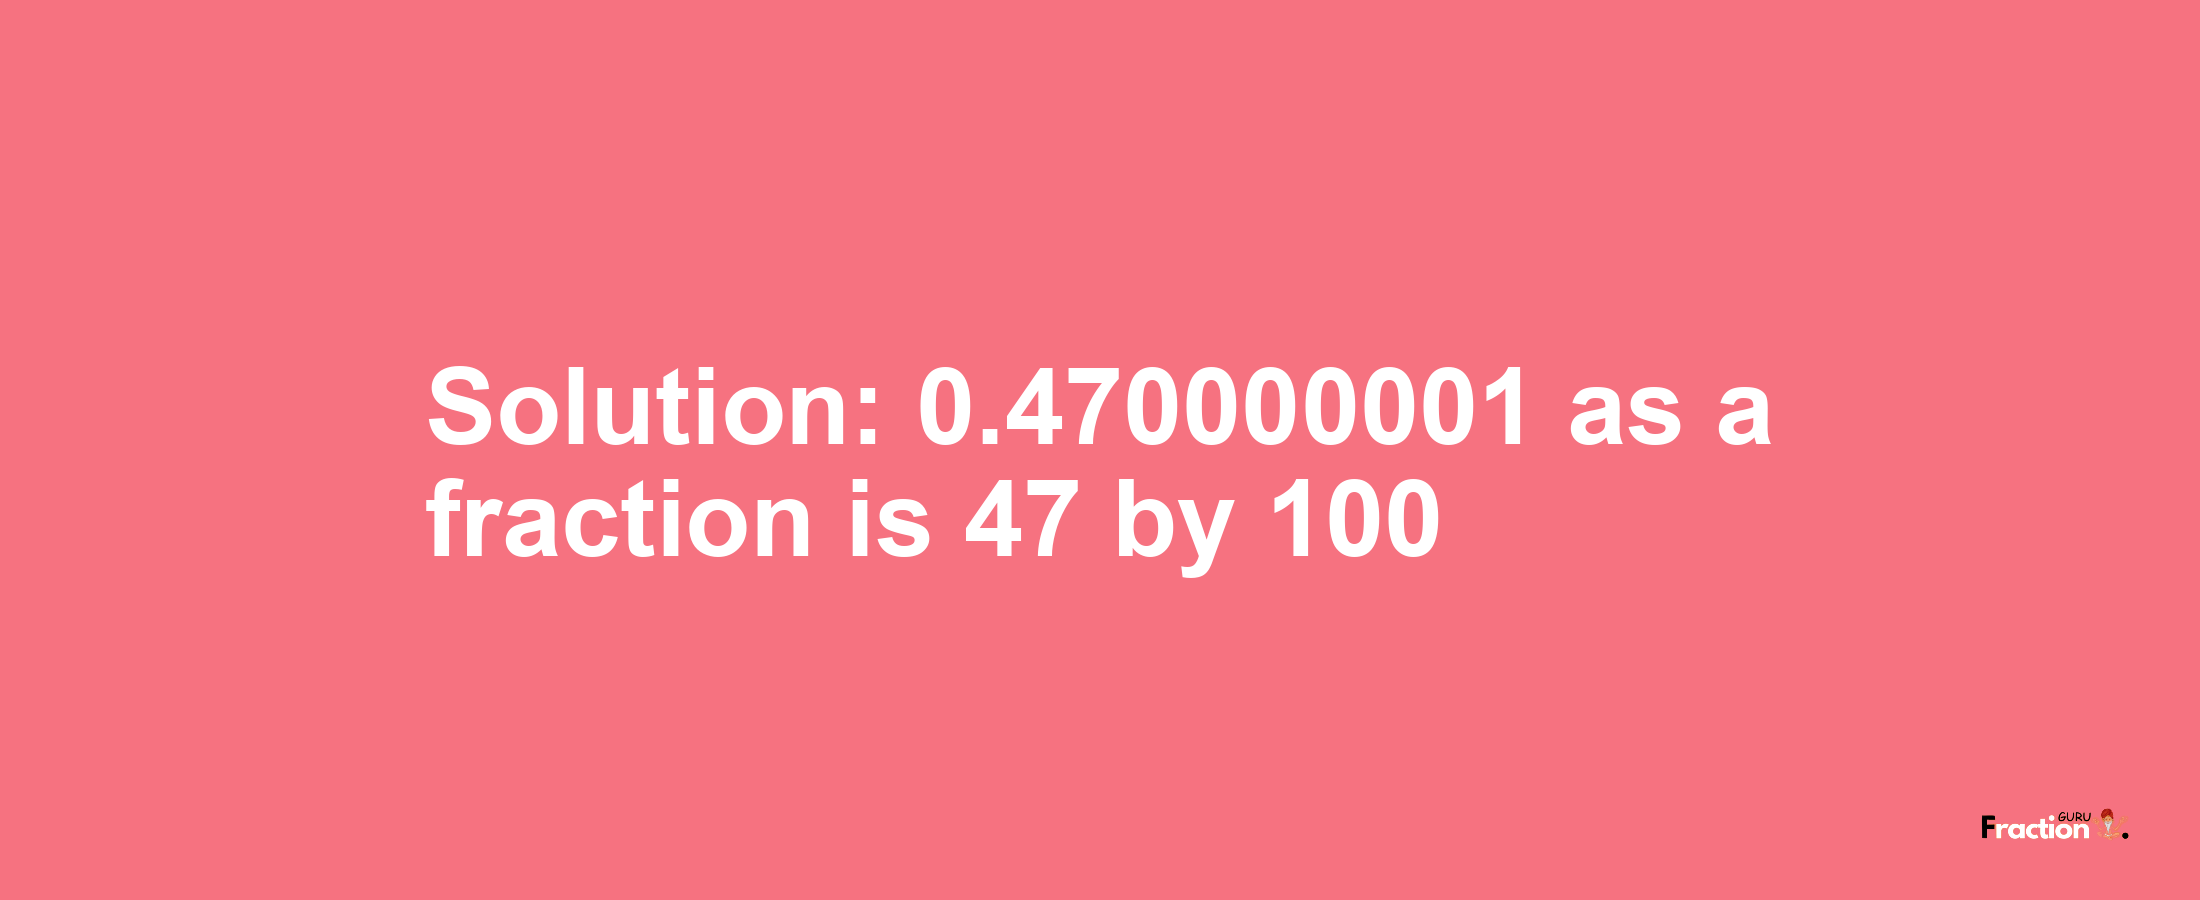 Solution:0.470000001 as a fraction is 47/100